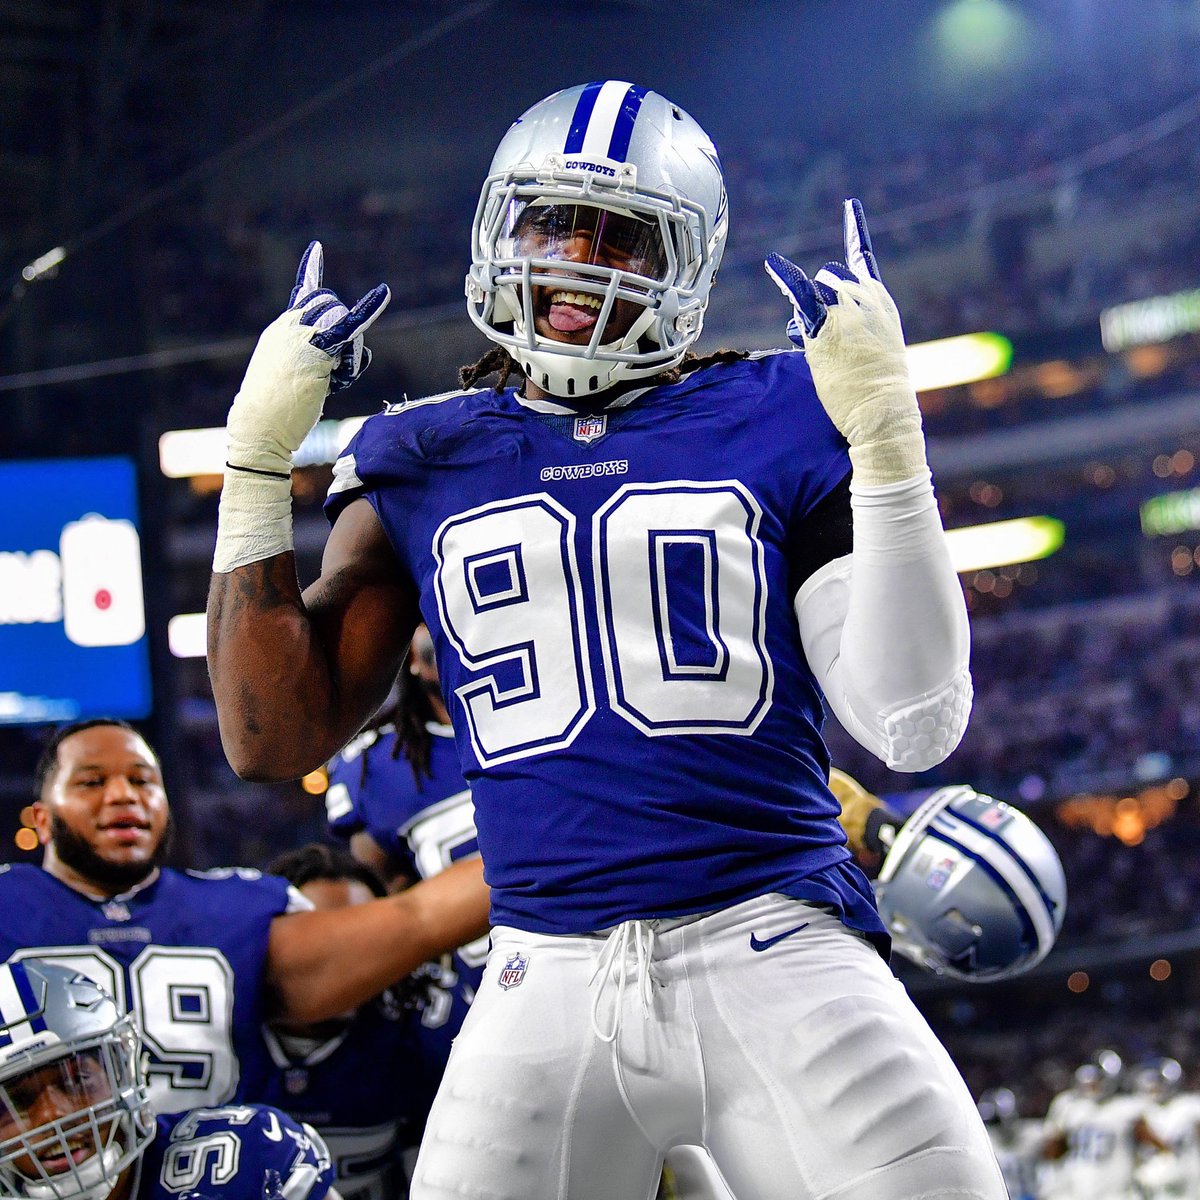 demarcus lawrence